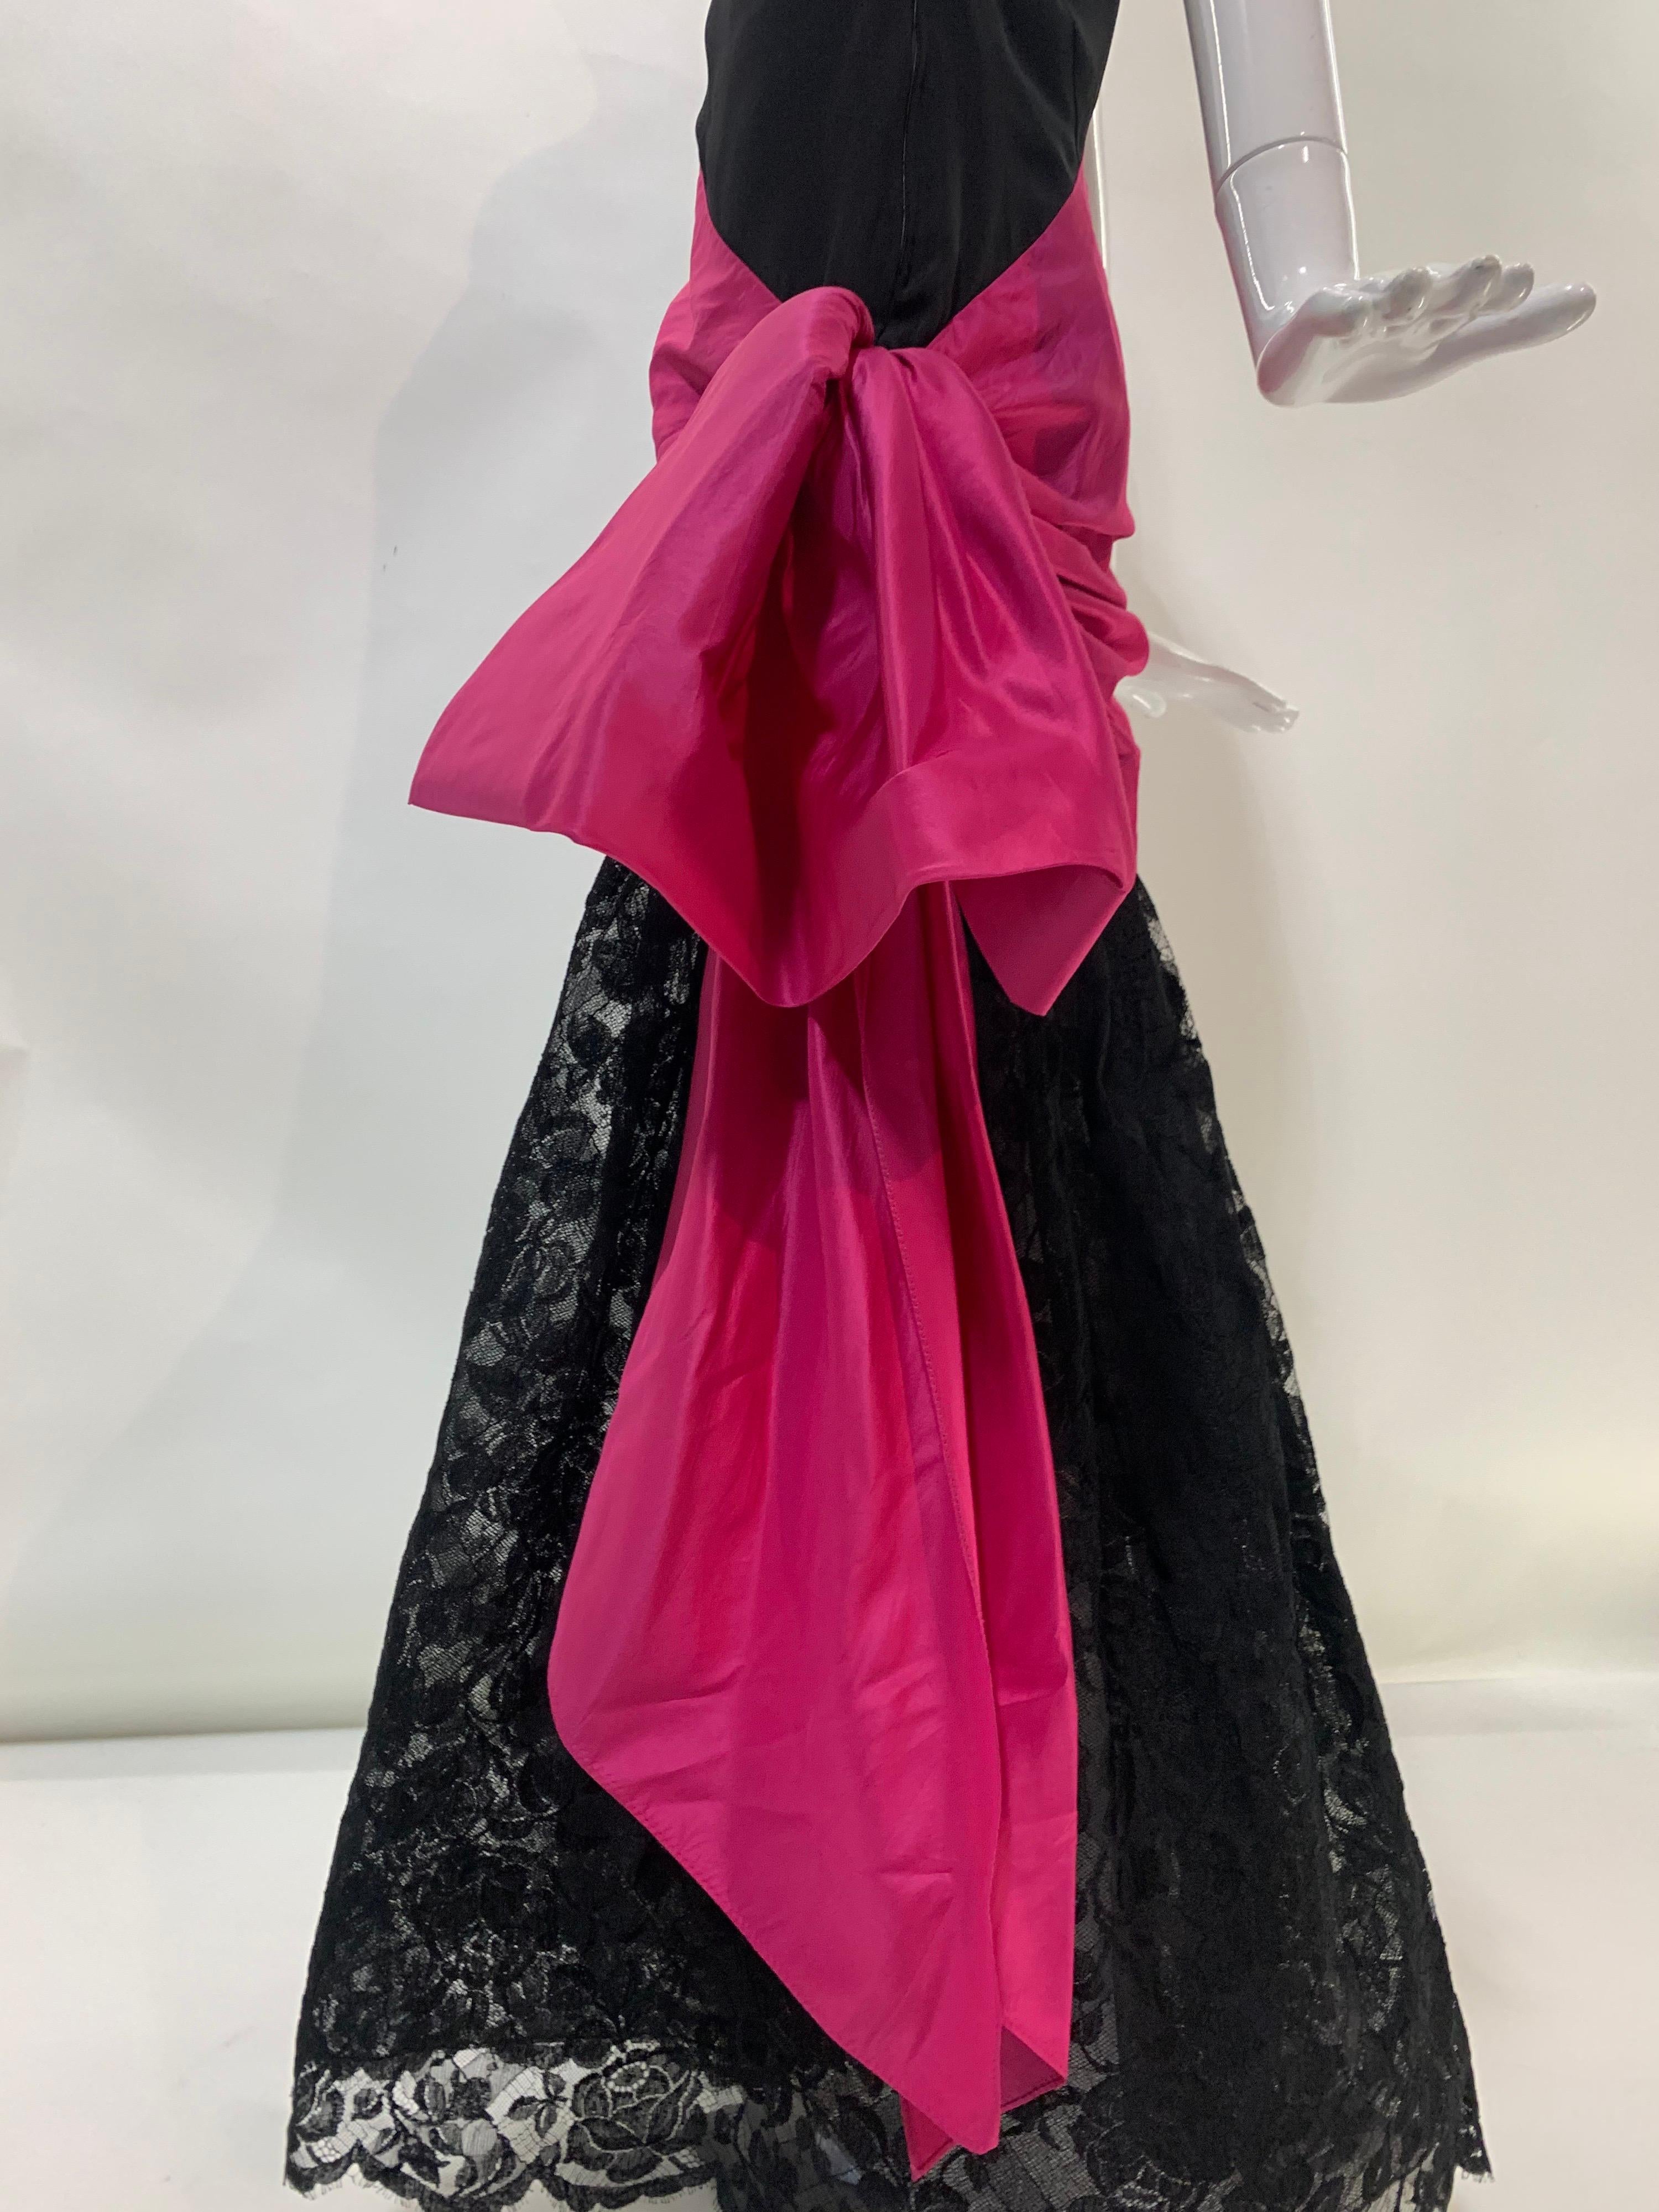 1980 Bill Blass Black Silk Crepe One-Shoulder Gown w/ Lace Skirt and Fuchsia Bow For Sale 7